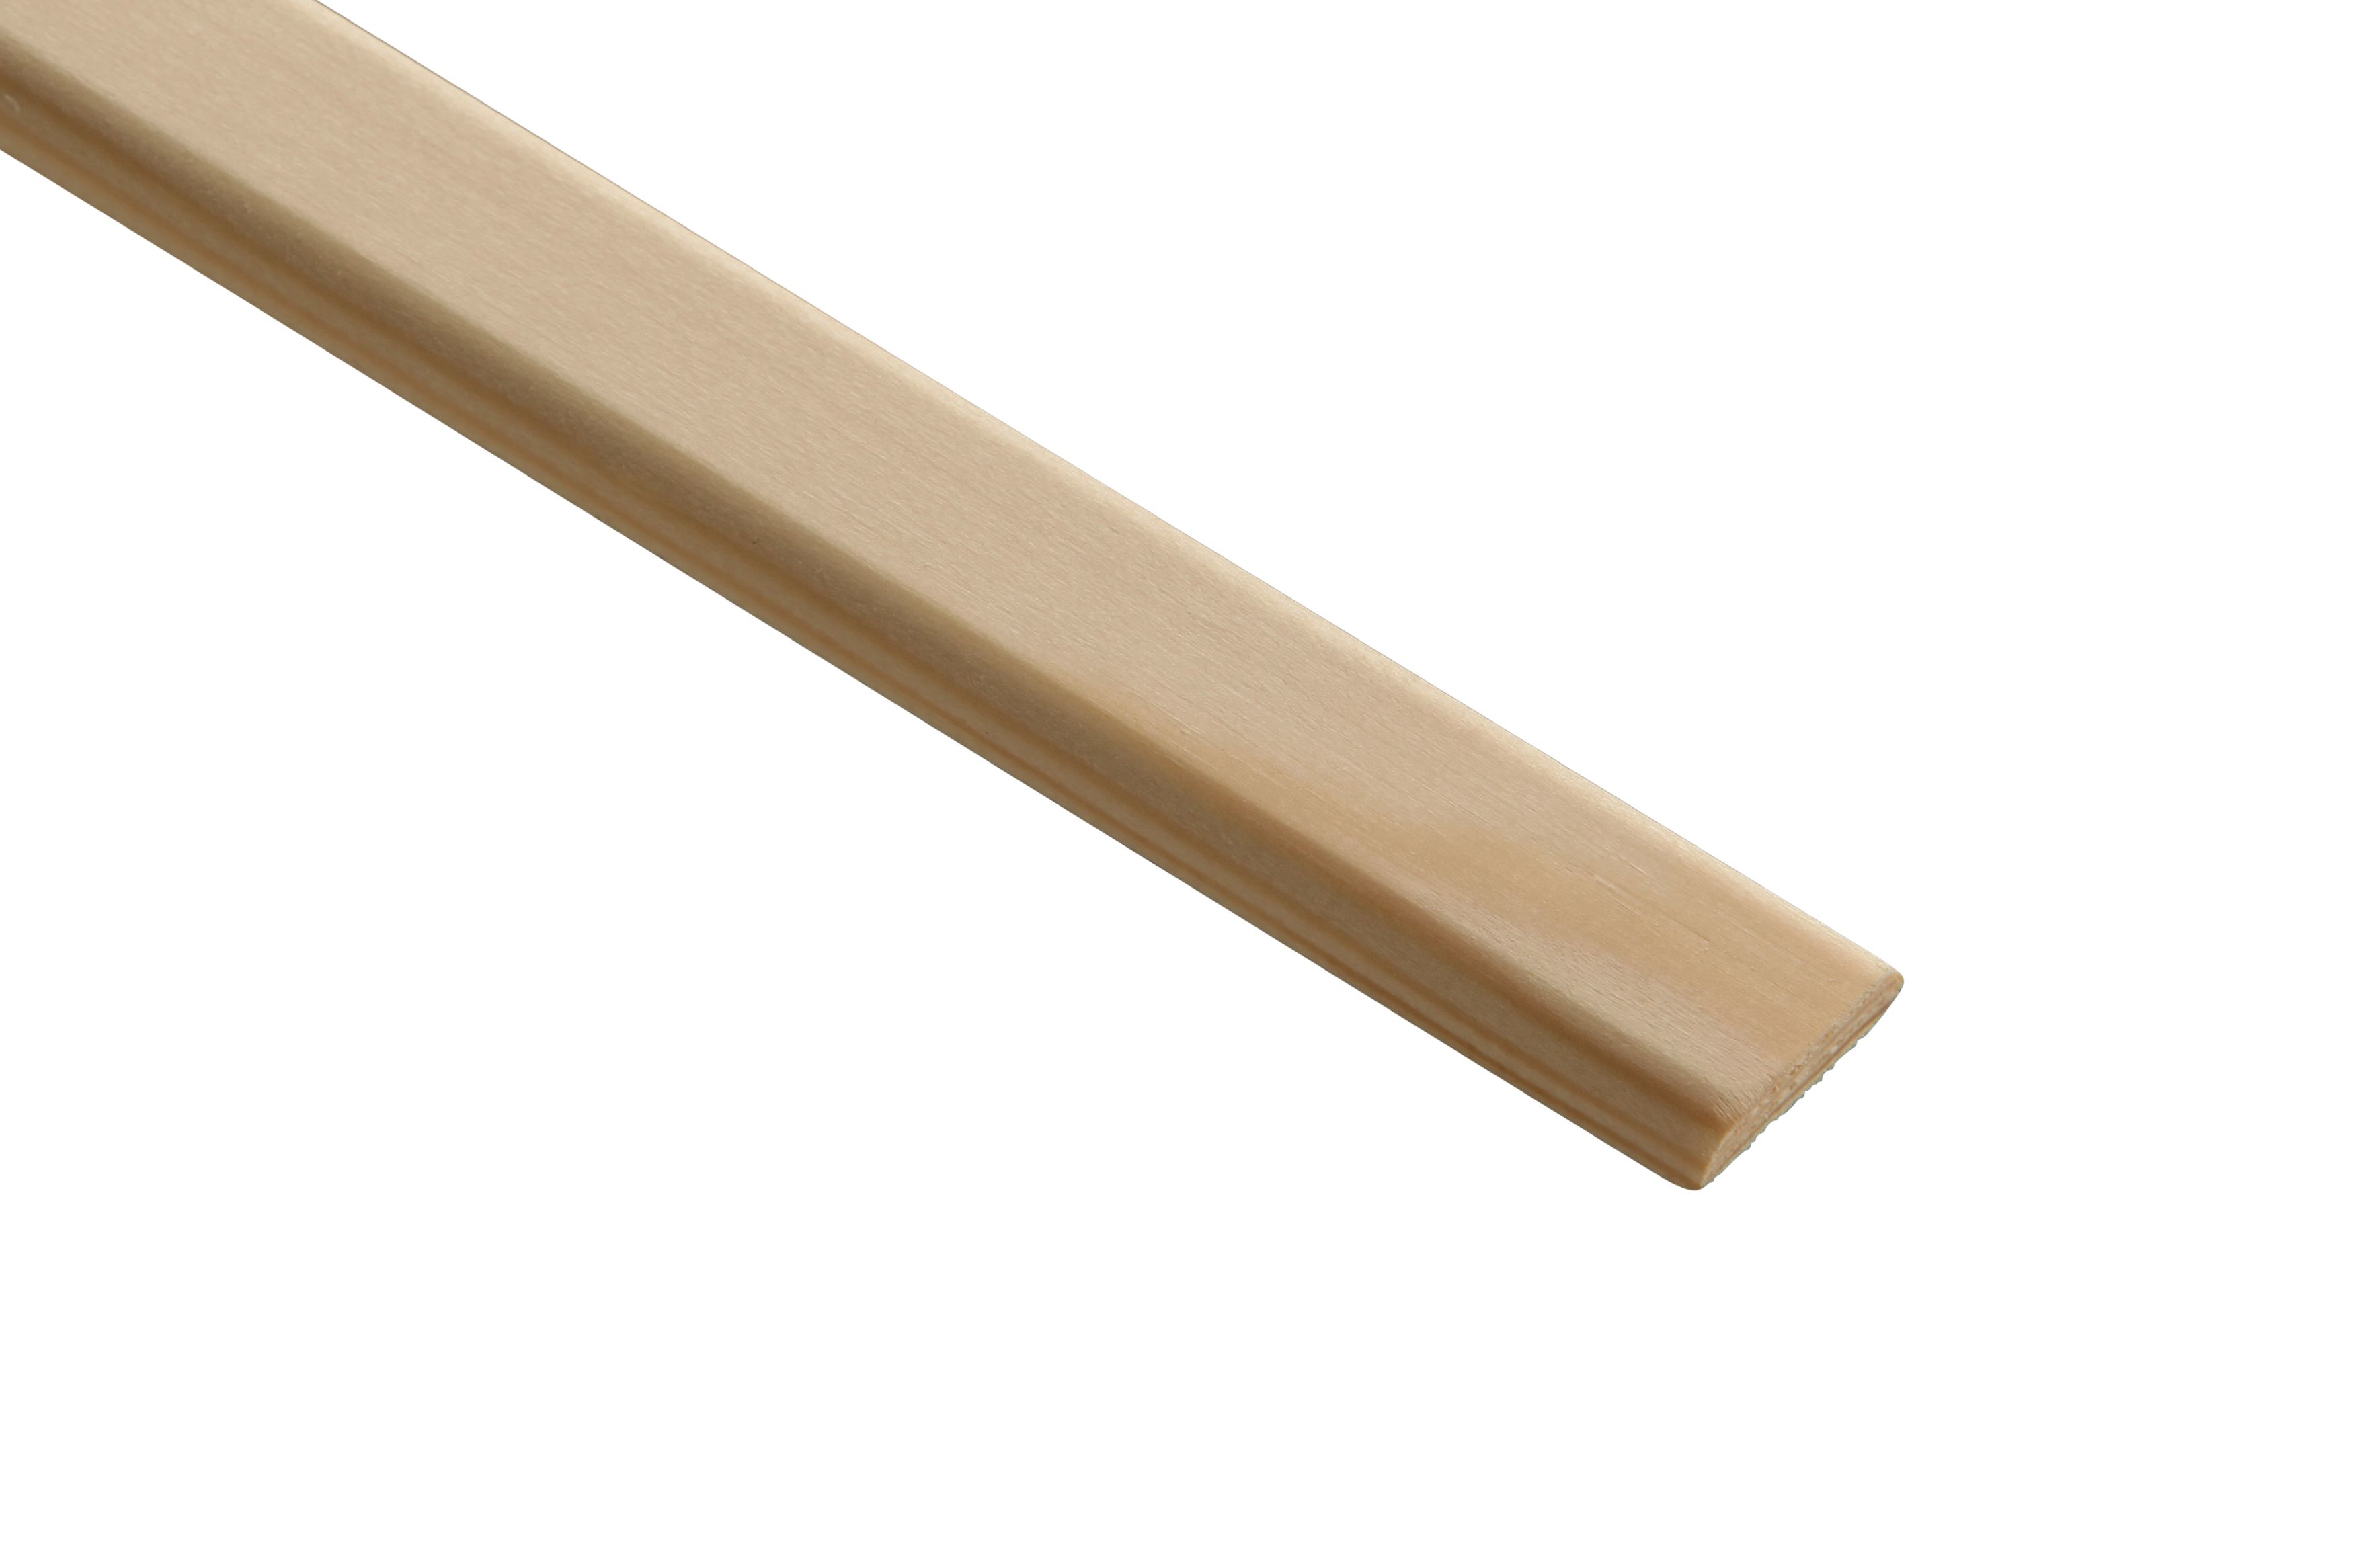 Image of Wickes Pine D-shape Moulding - 34 x 8 x 2400mm